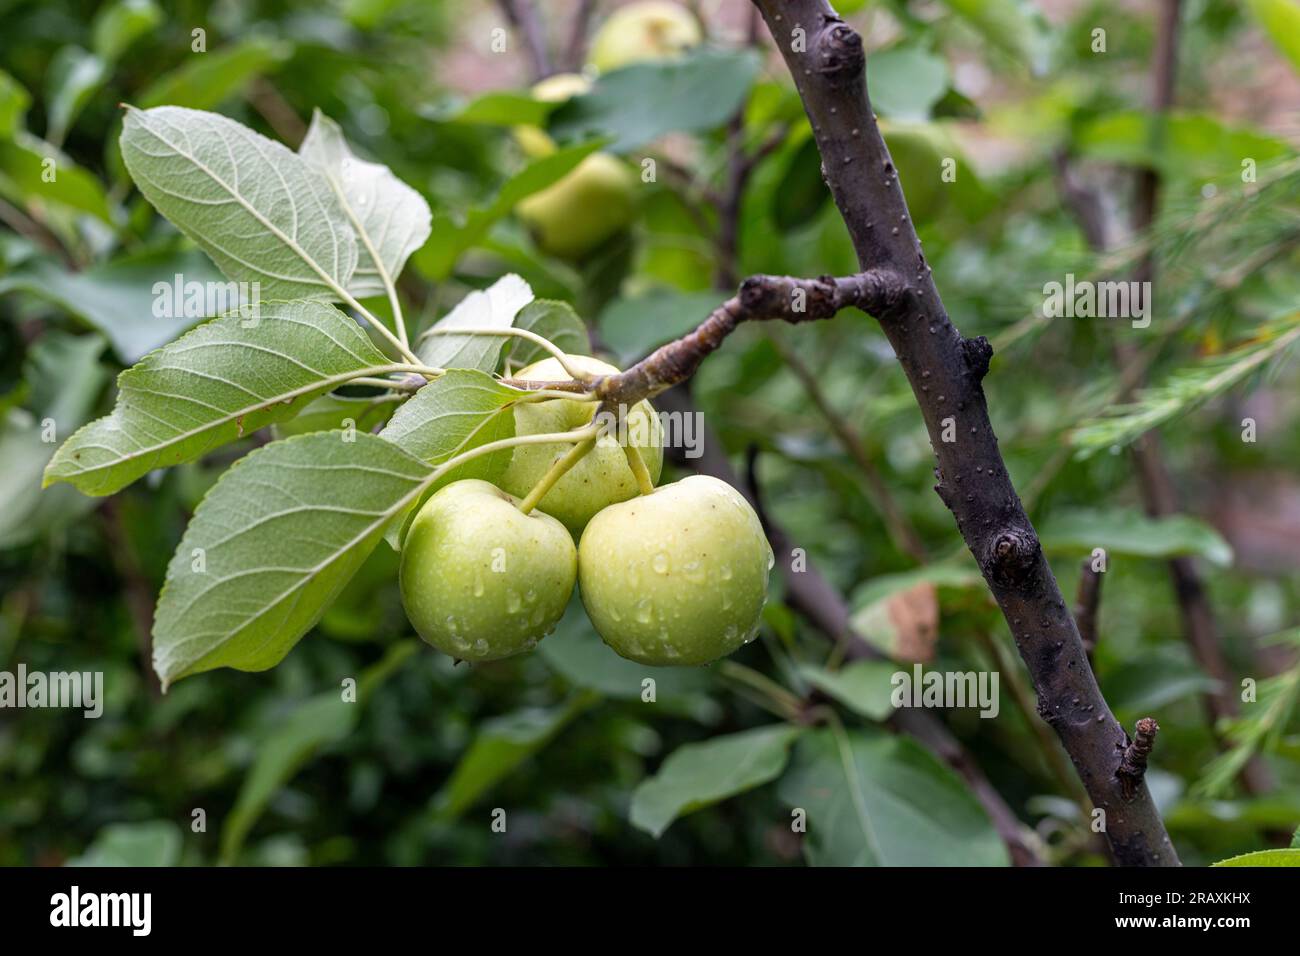 Unripe small apple growing on a fruit tree Stock Photo